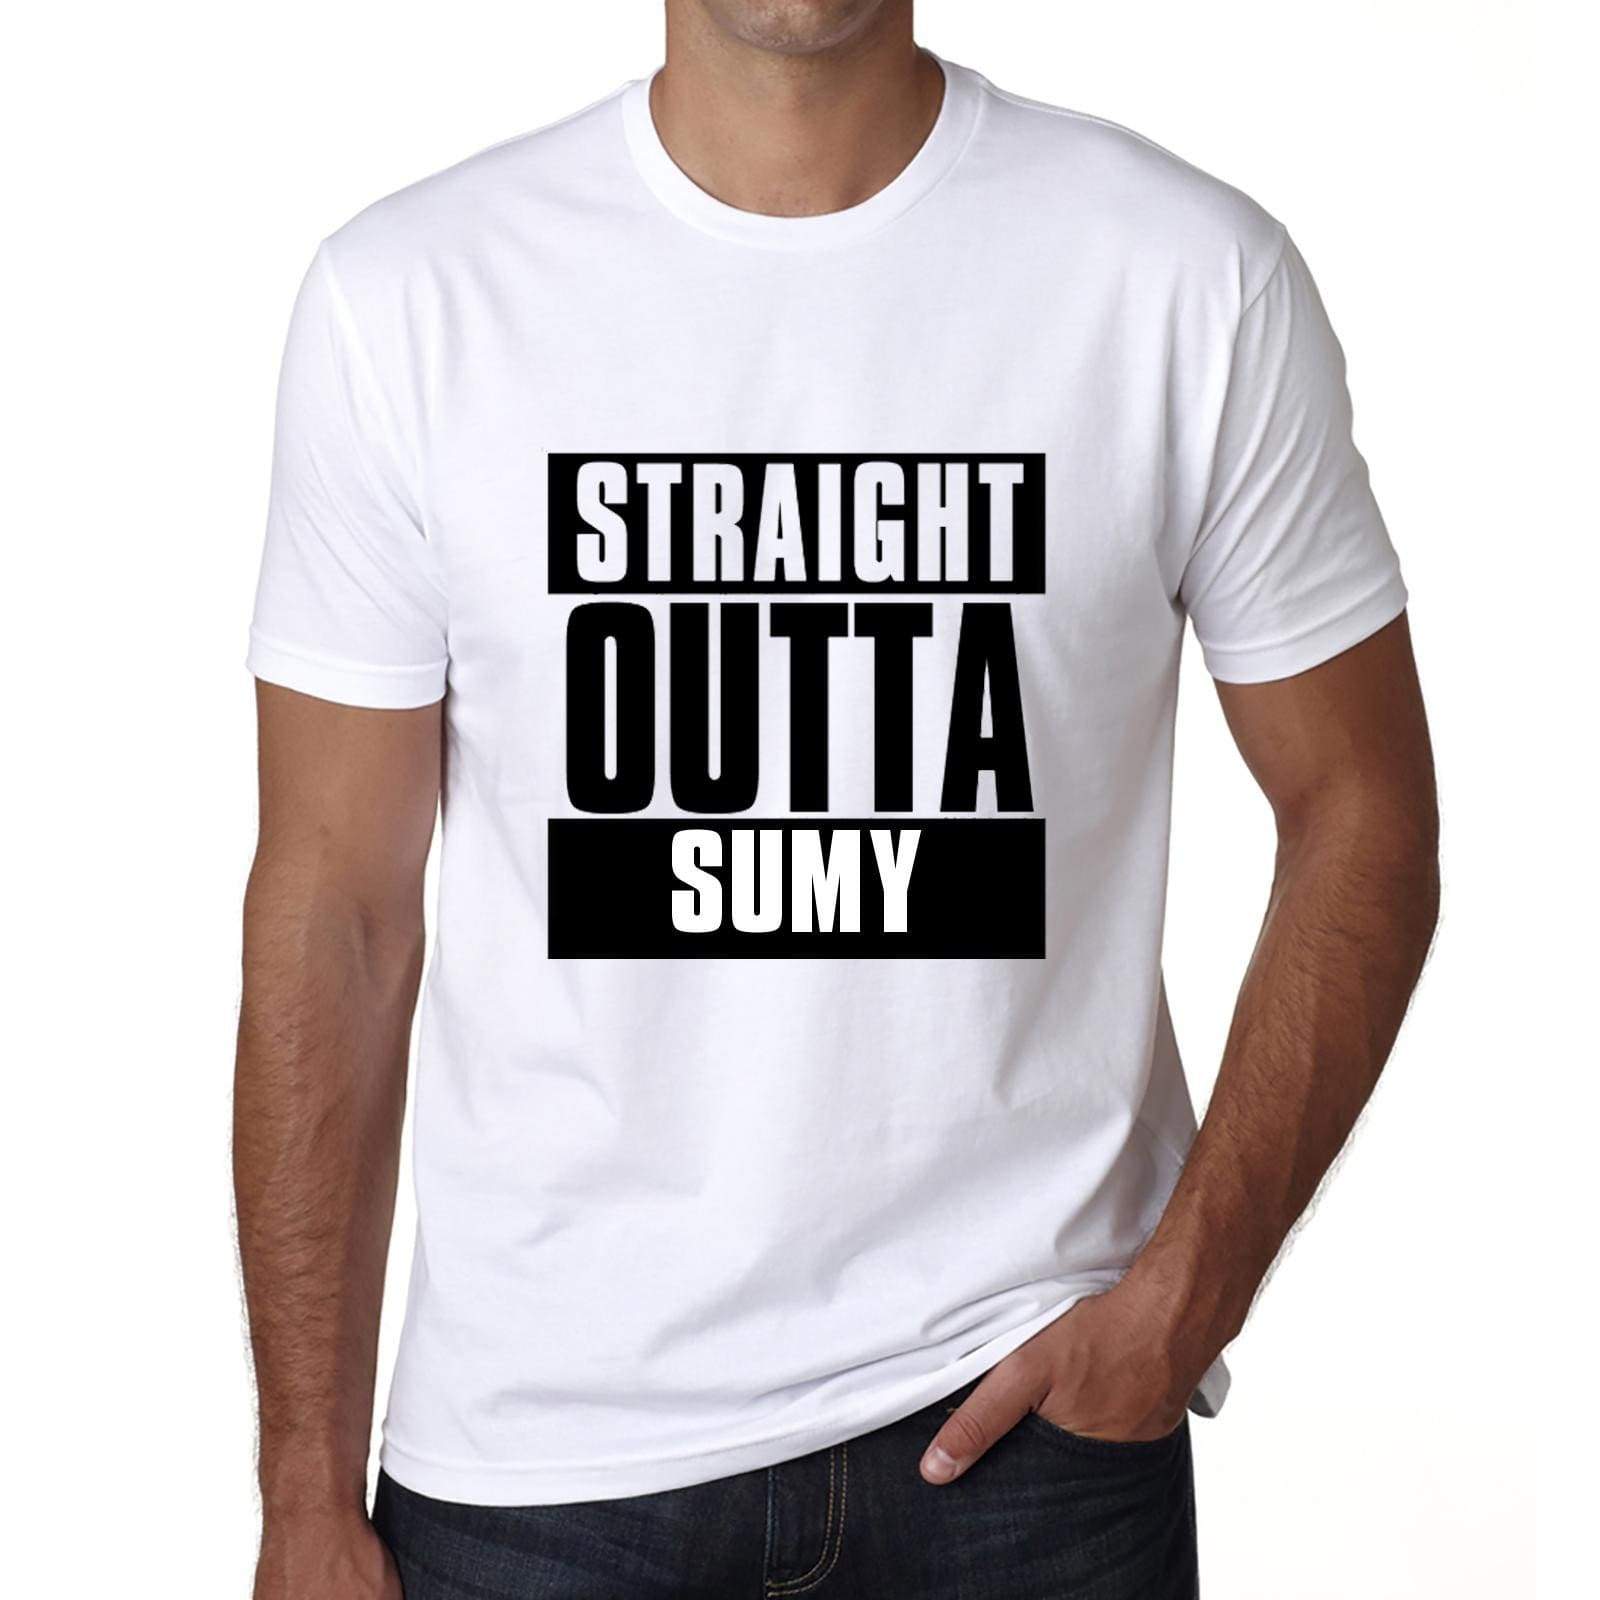 Straight Outta Sumy Mens Short Sleeve Round Neck T-Shirt 00027 - White / S - Casual